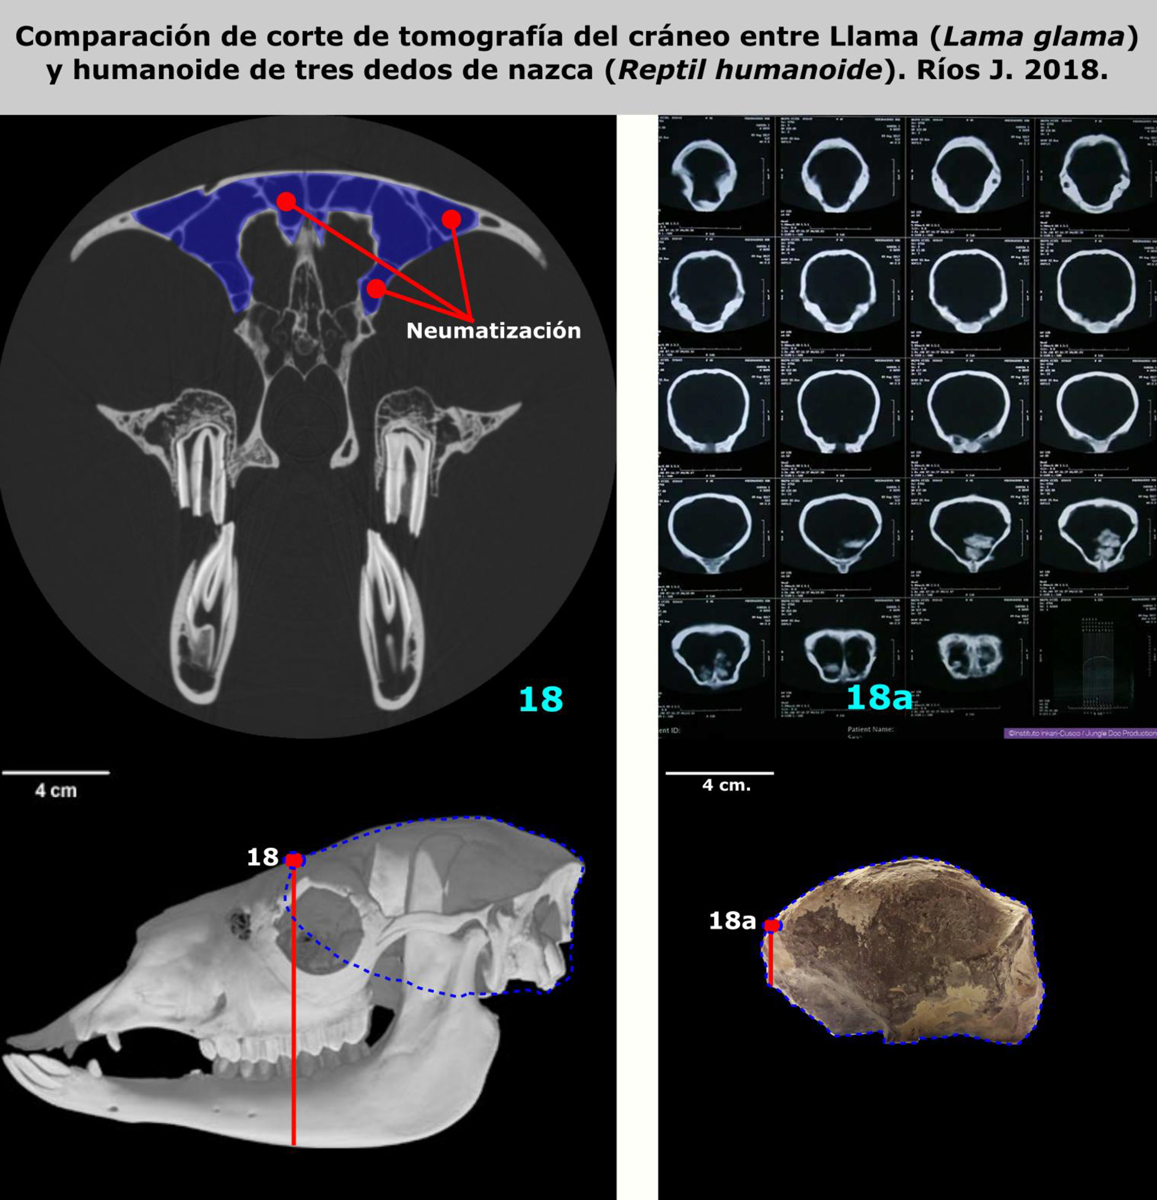 Comparison of tomographic sections of skulls (scanner images) between the Lama (Lama glama) and the three-fingered Nasca humanoid (Humanoid Reptile). Rios J. 2018